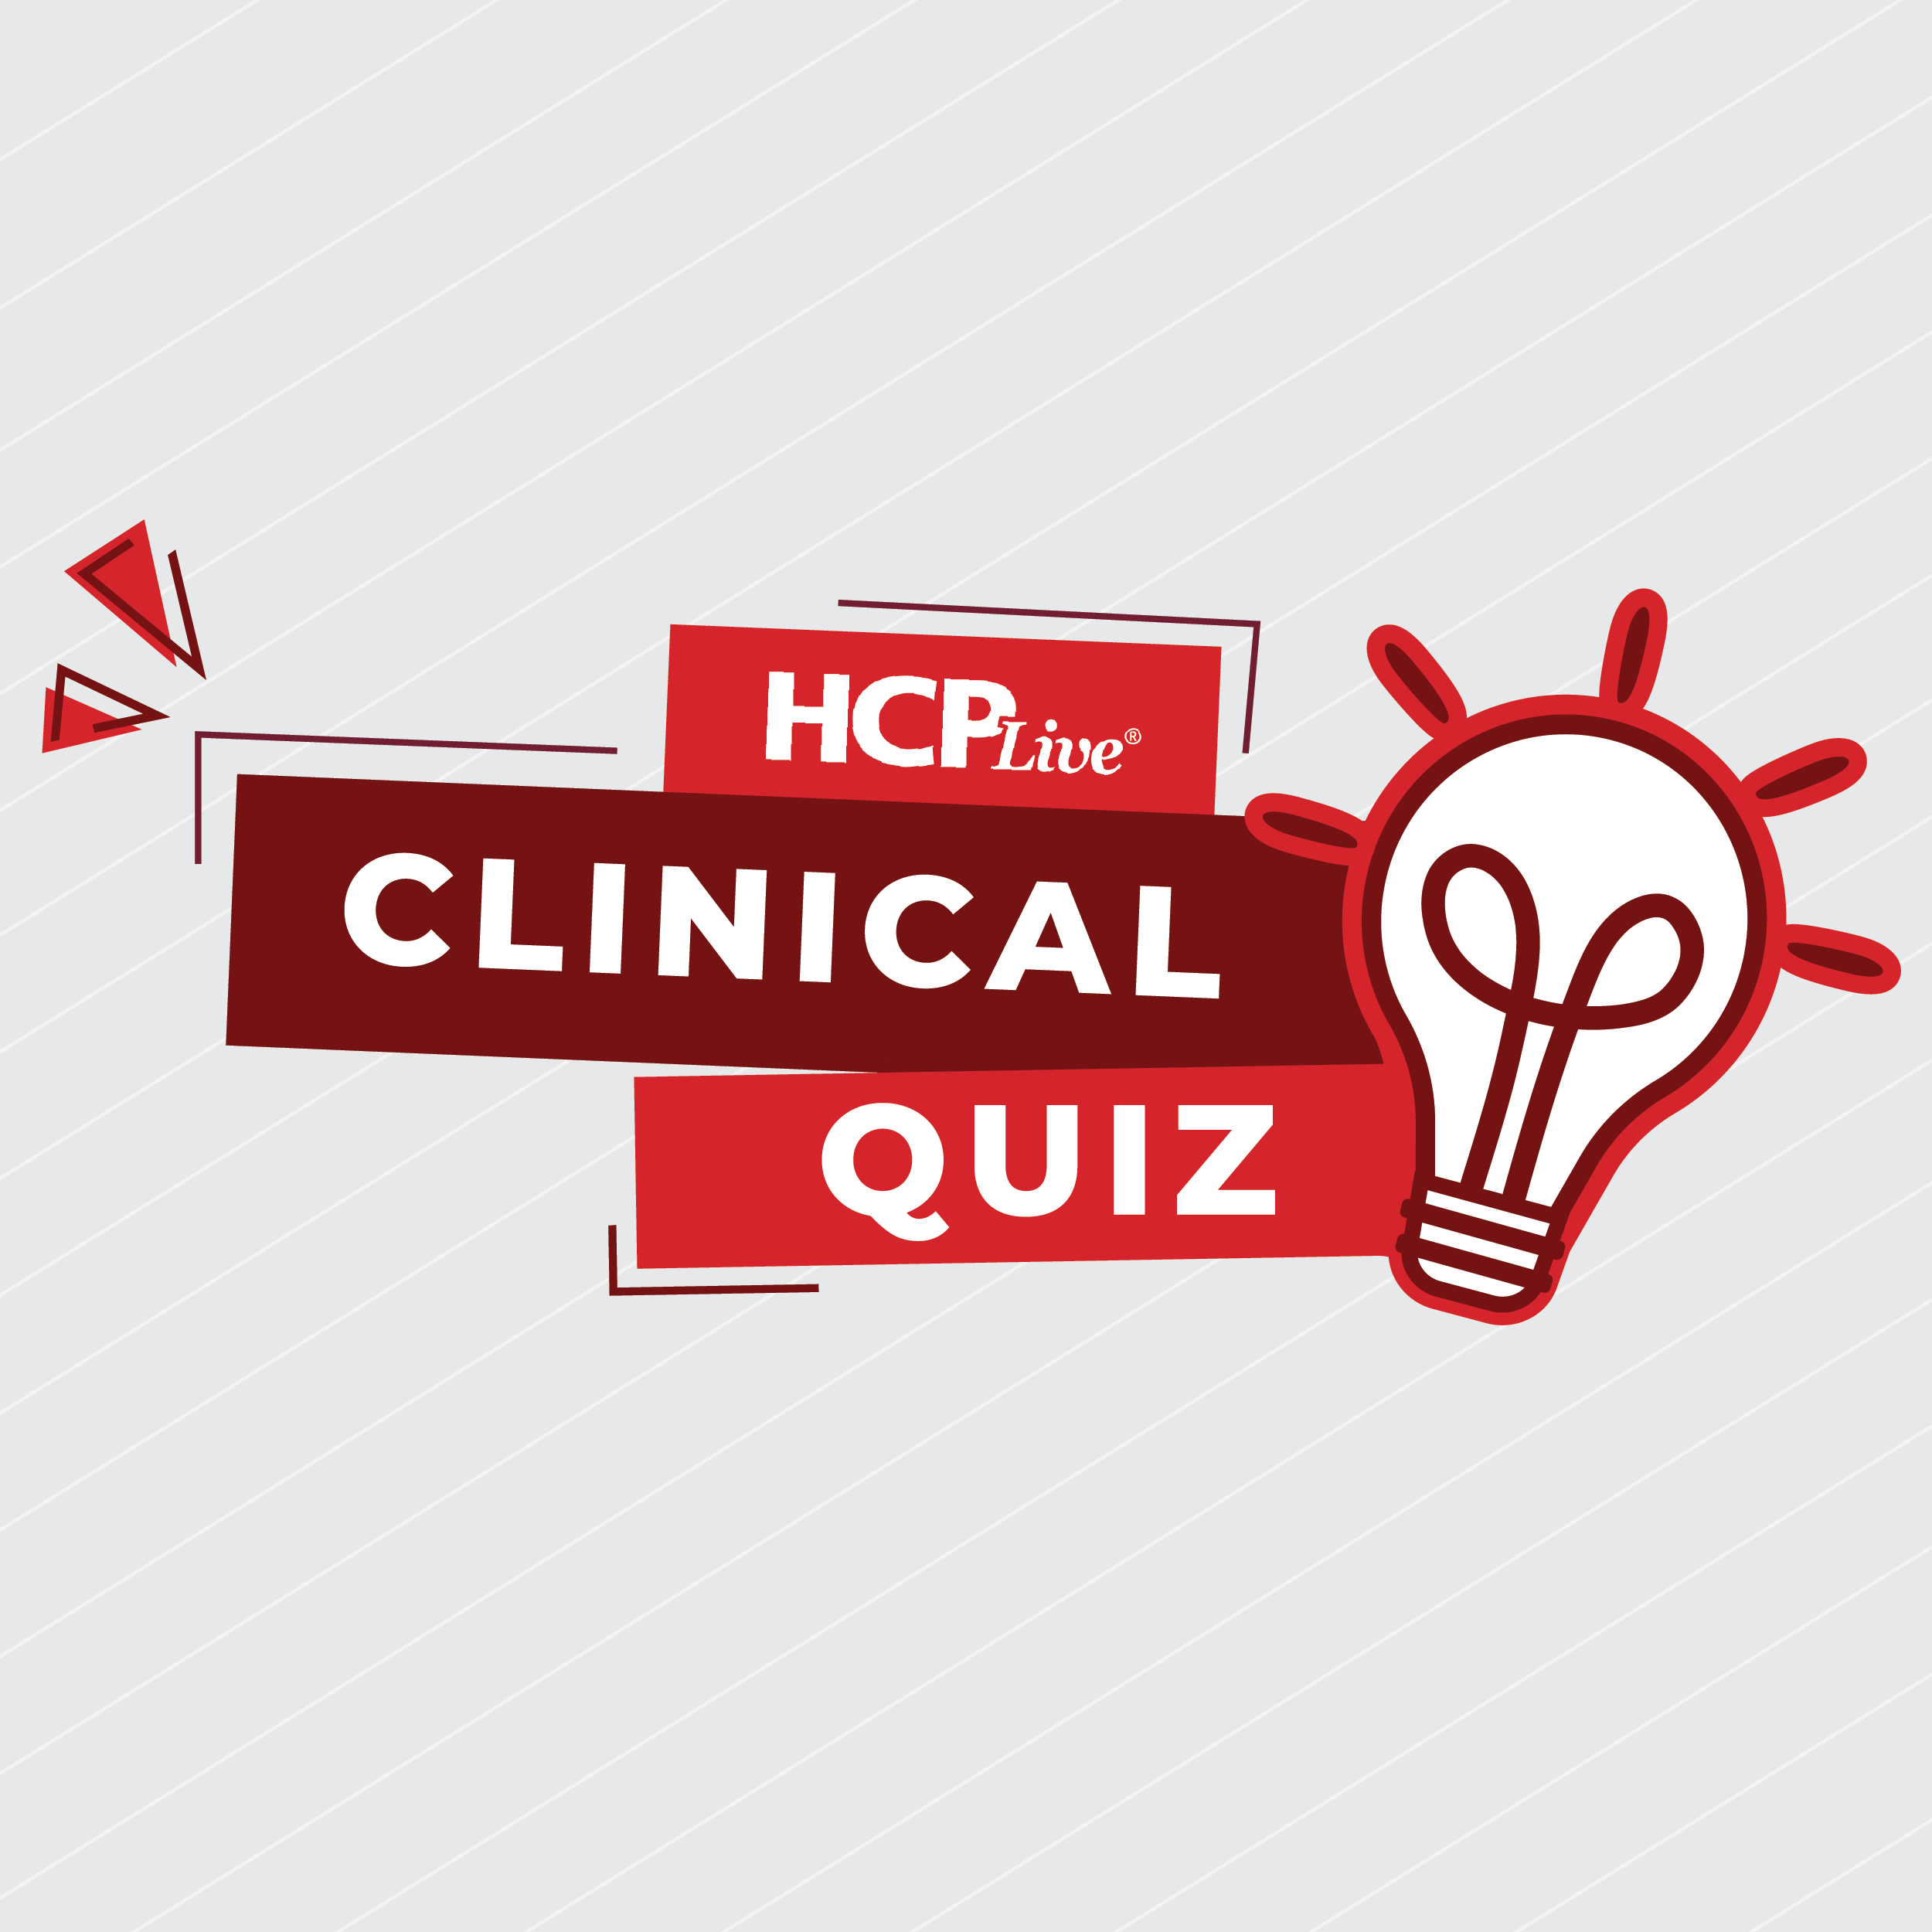 Clinical Quiz: Gastrointestinal Evaluation of Iron Deficiency Anemia | Image Credit: HCPLive